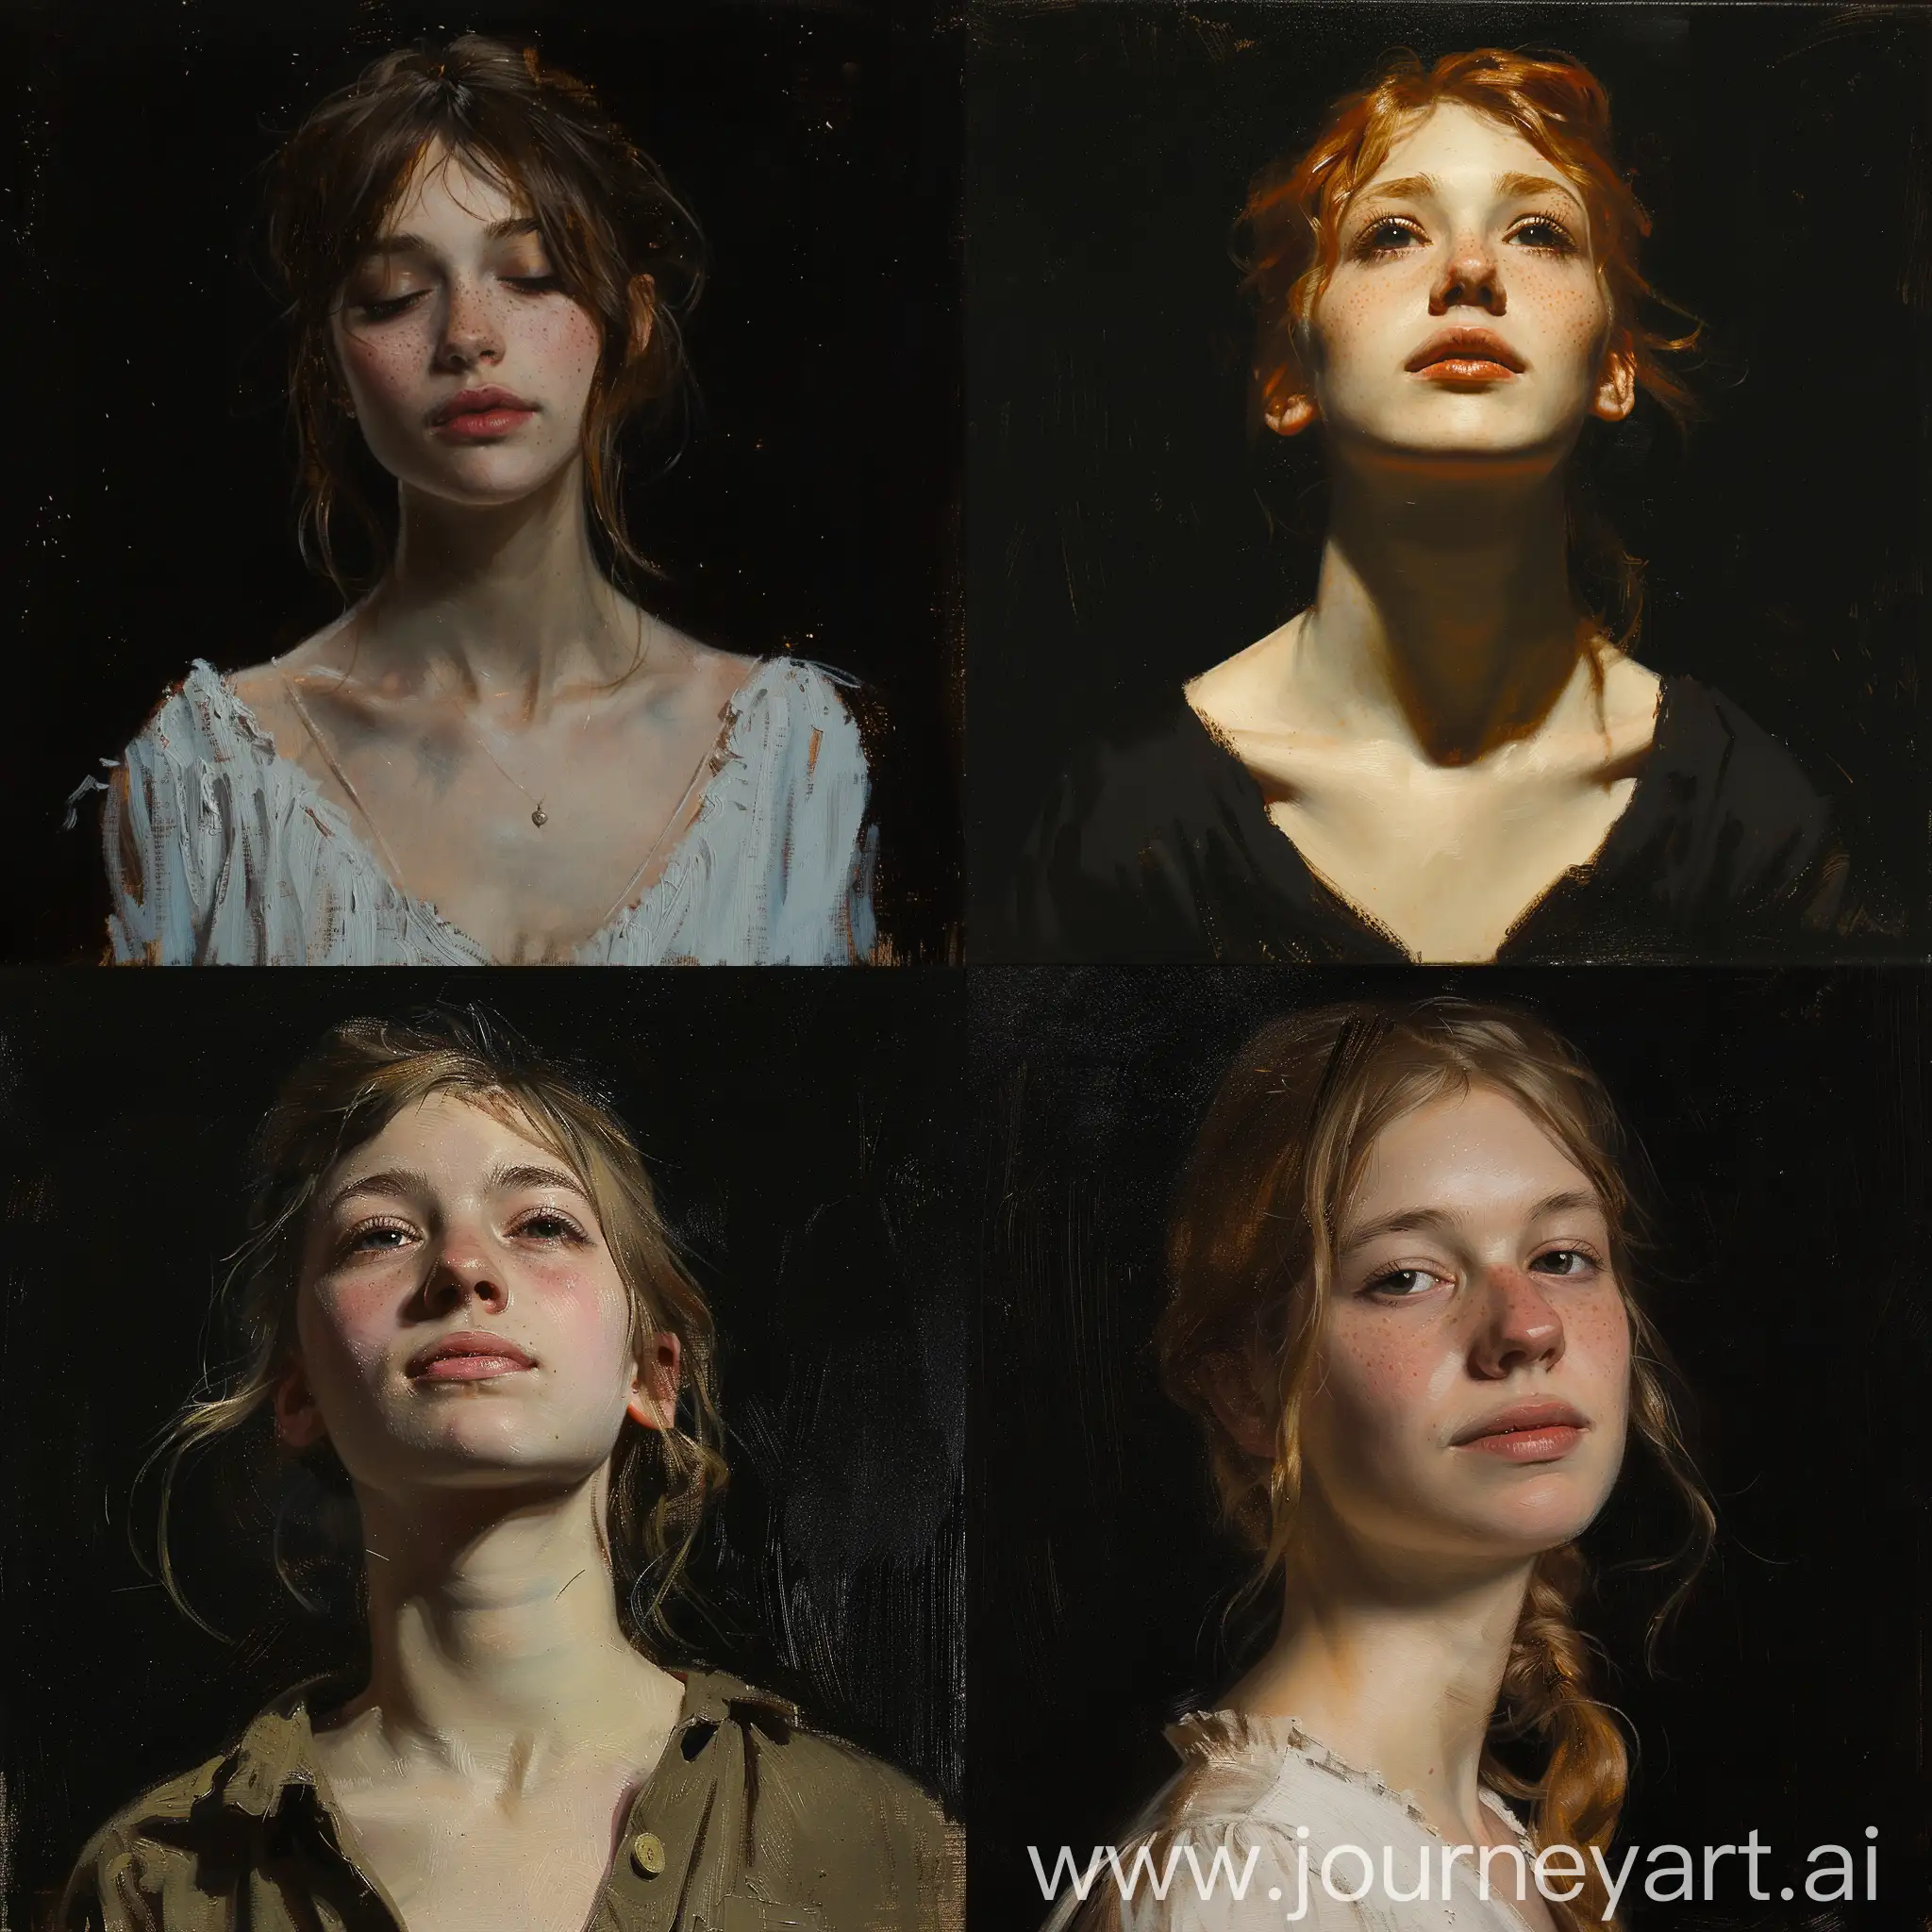 Oil sketch of a young woman , wlop John singer Sargent, jeremy lipkin and rob rey, range murata jeremy lipking, John singer Sargent, black background, jeremy lipkin, lensculture portrait awards, casey baugh and james jean, detailed realism in painting, award-winning portrait, amazingly detailed oil painting